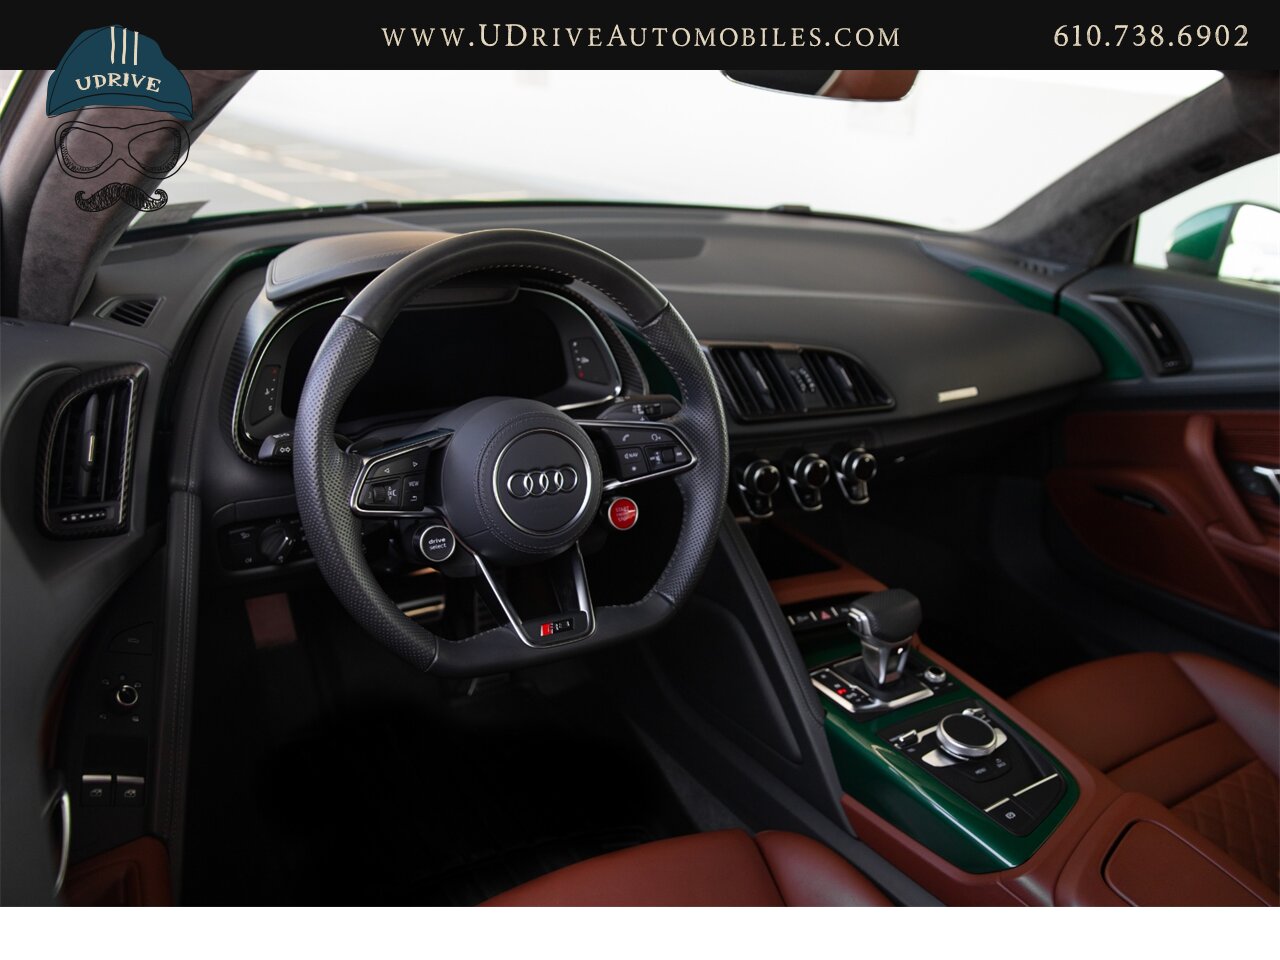 2017 Audi R8 Audi Exclusive Avocado Green Vermont Brown Leather  Diamond Stitching V10 Carbon Fiber - Photo 8 - West Chester, PA 19382